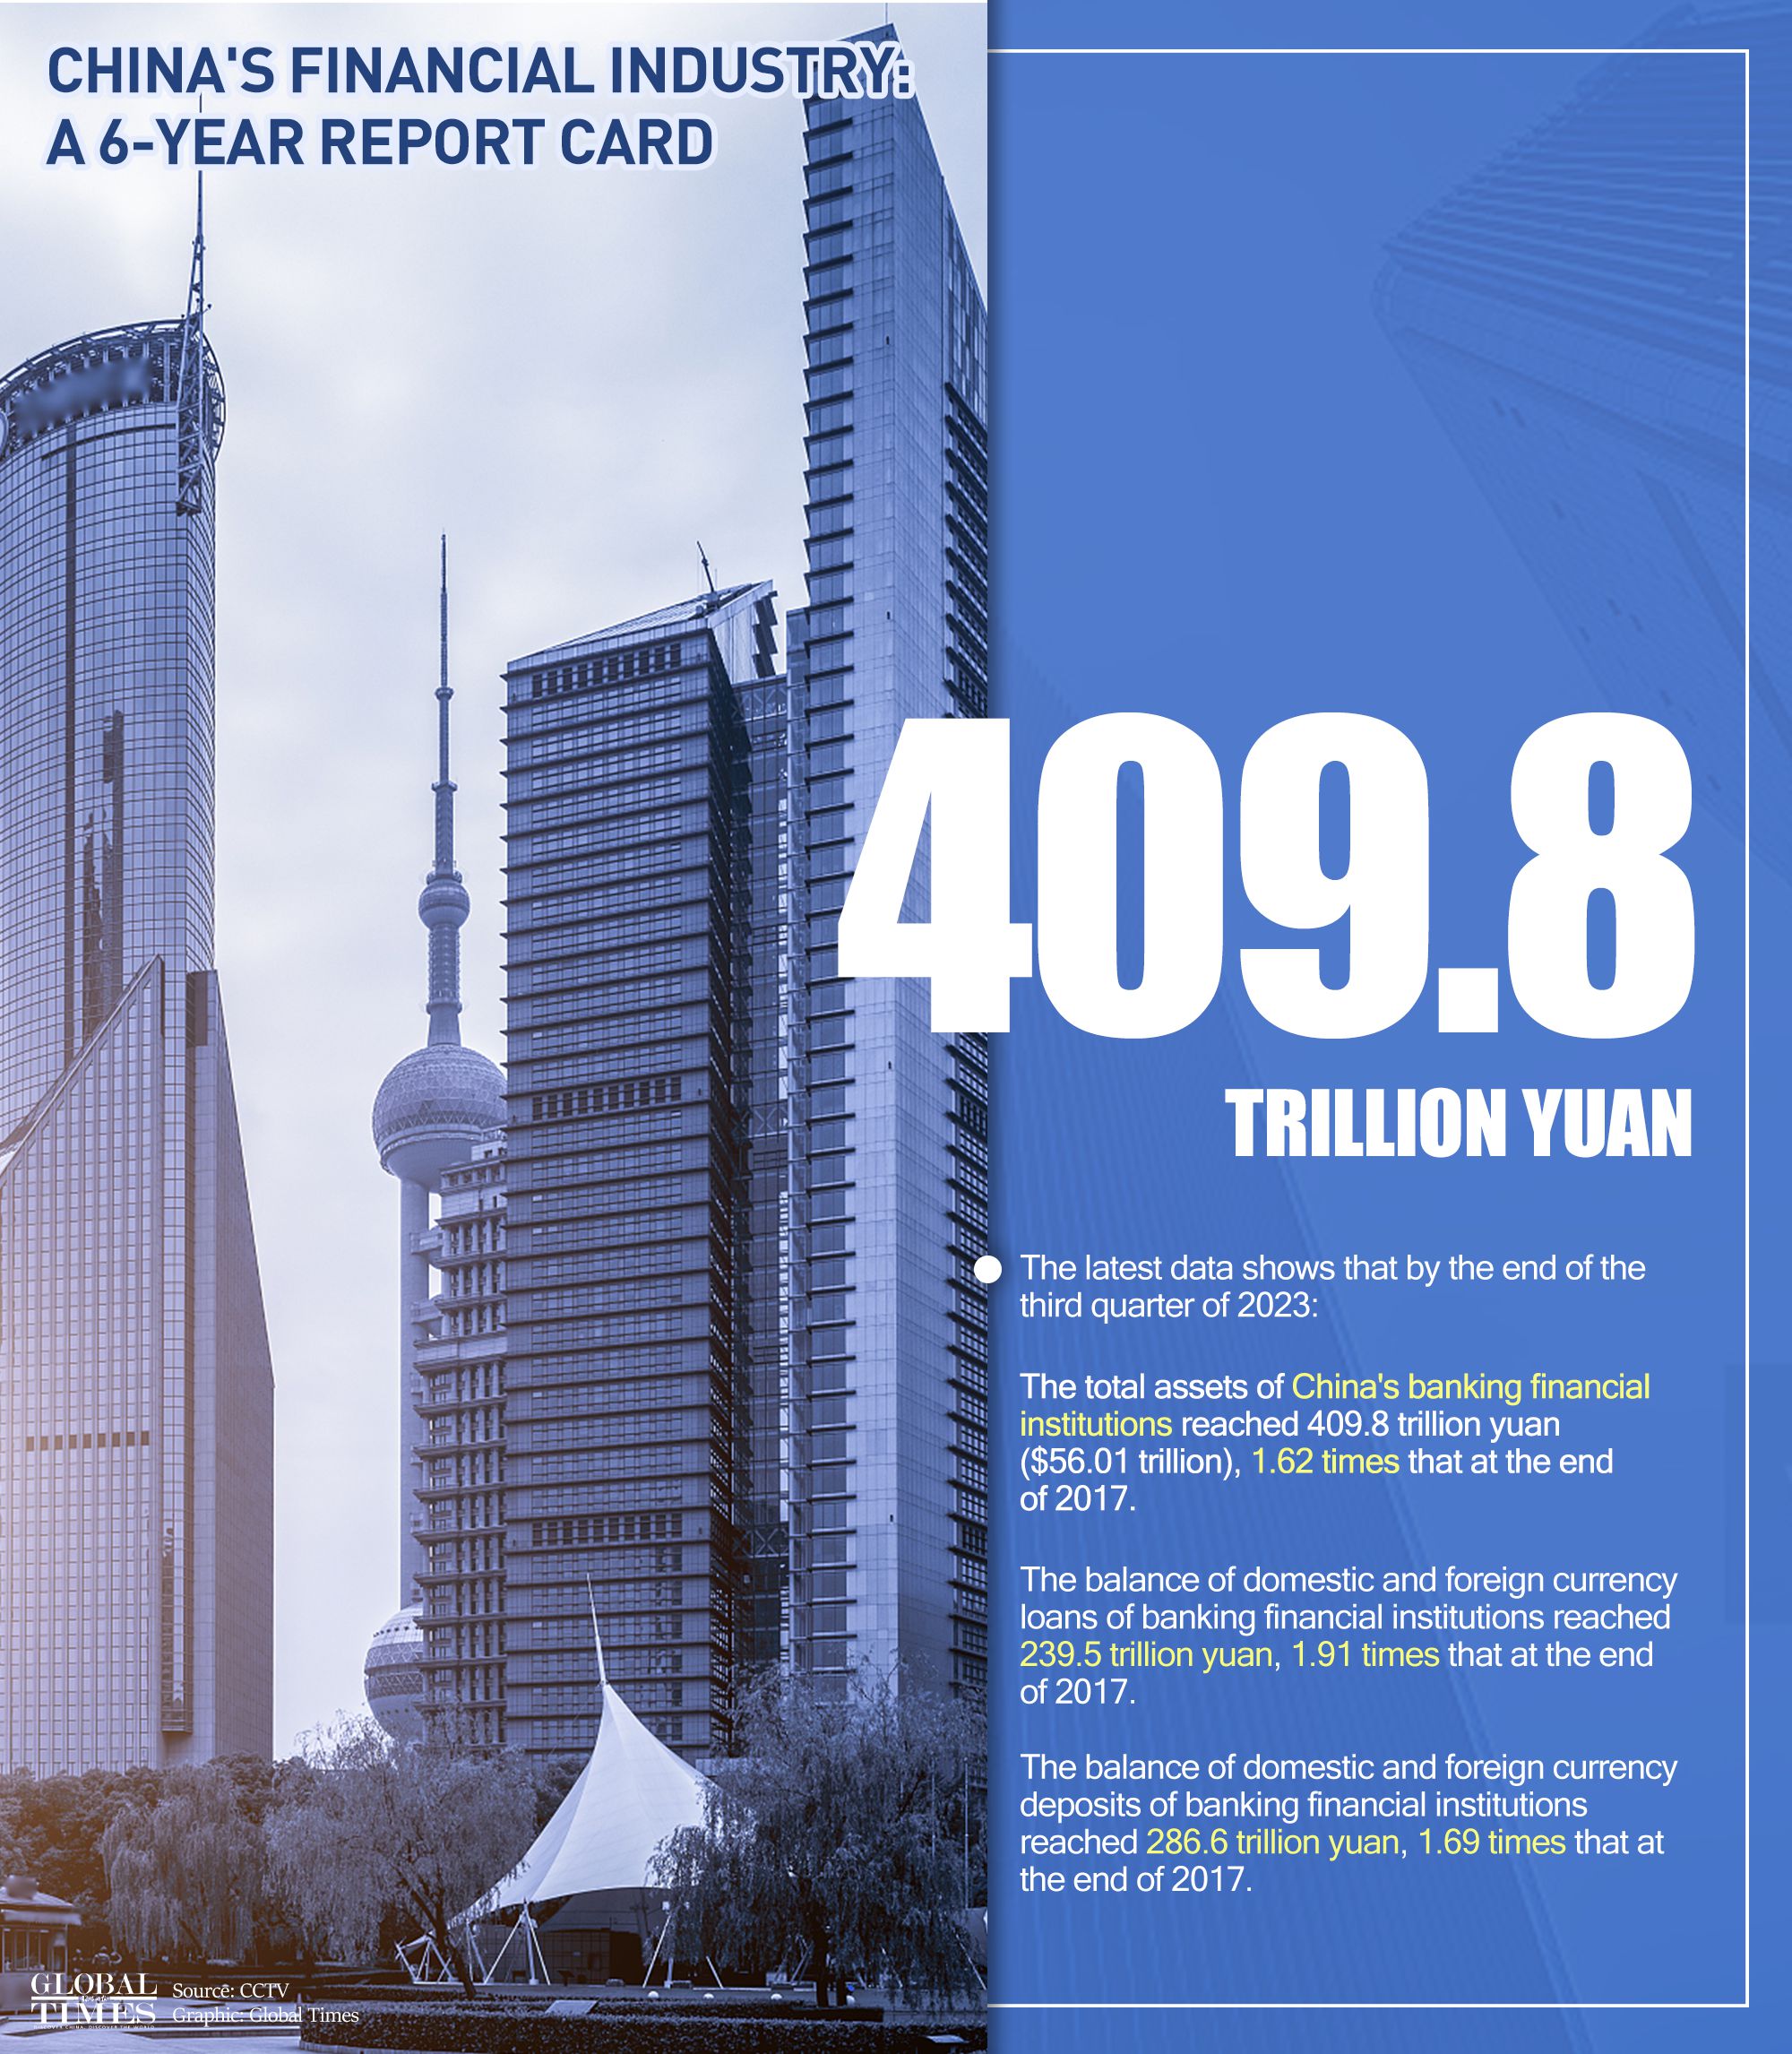 China's financial industry: A 6-year report card